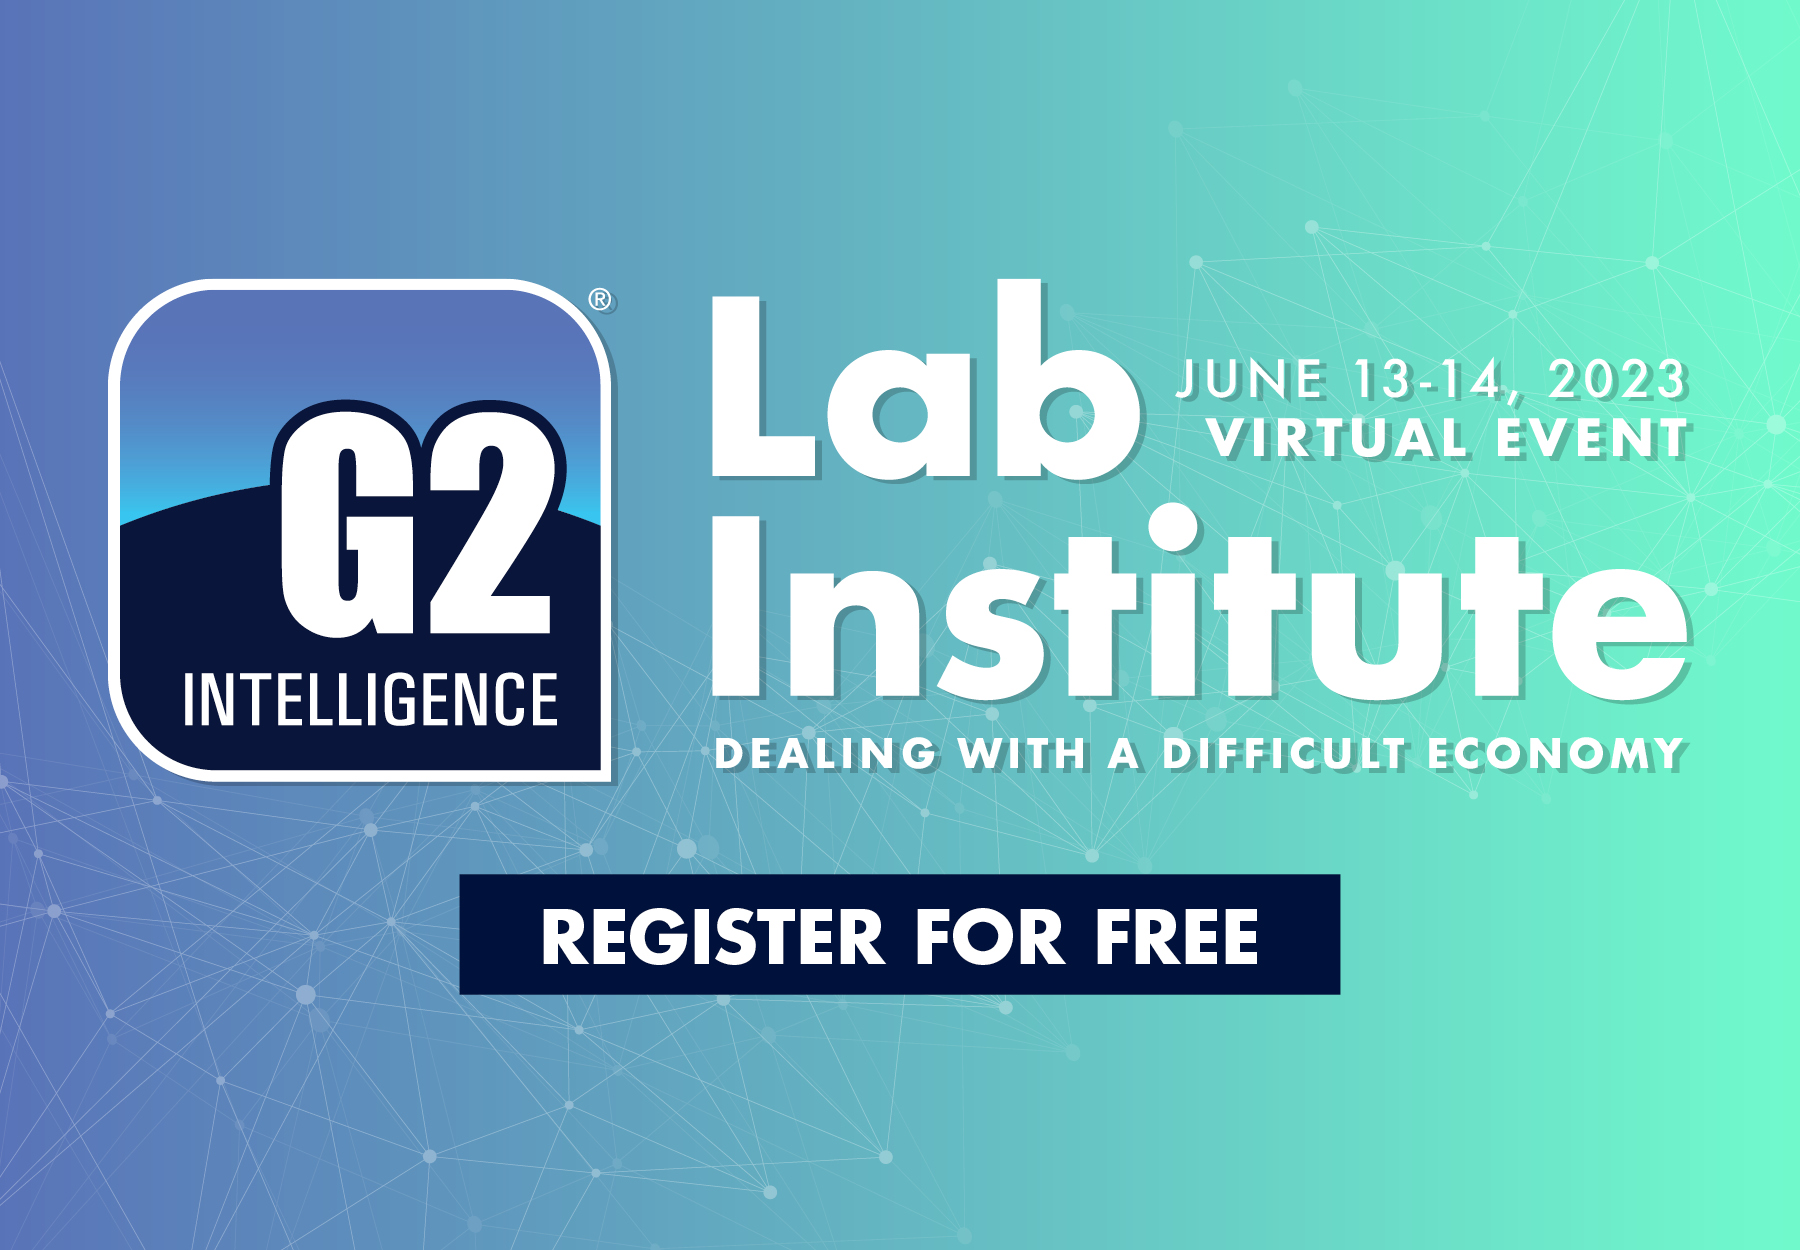 A blue, white, and aqua green-colored banner promoting G2 Intelligence's June 13-14 Lab Institute Virtual Event on Dealing with a Difficult Economy.